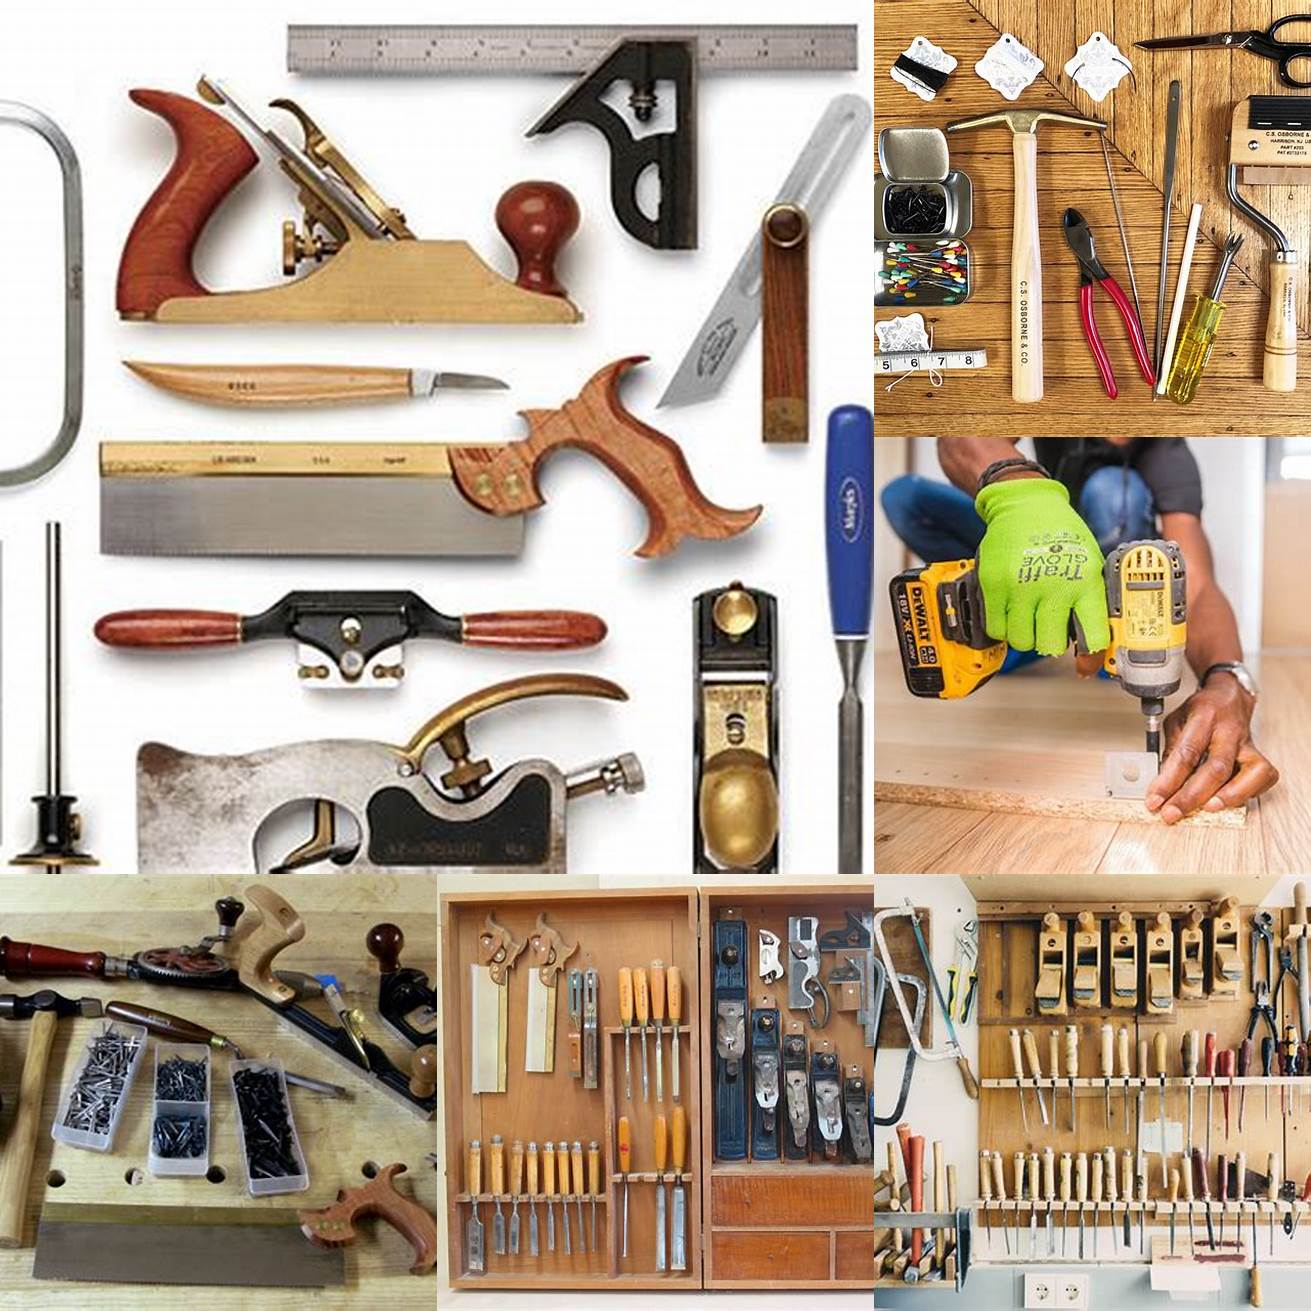 Tools and Equipment